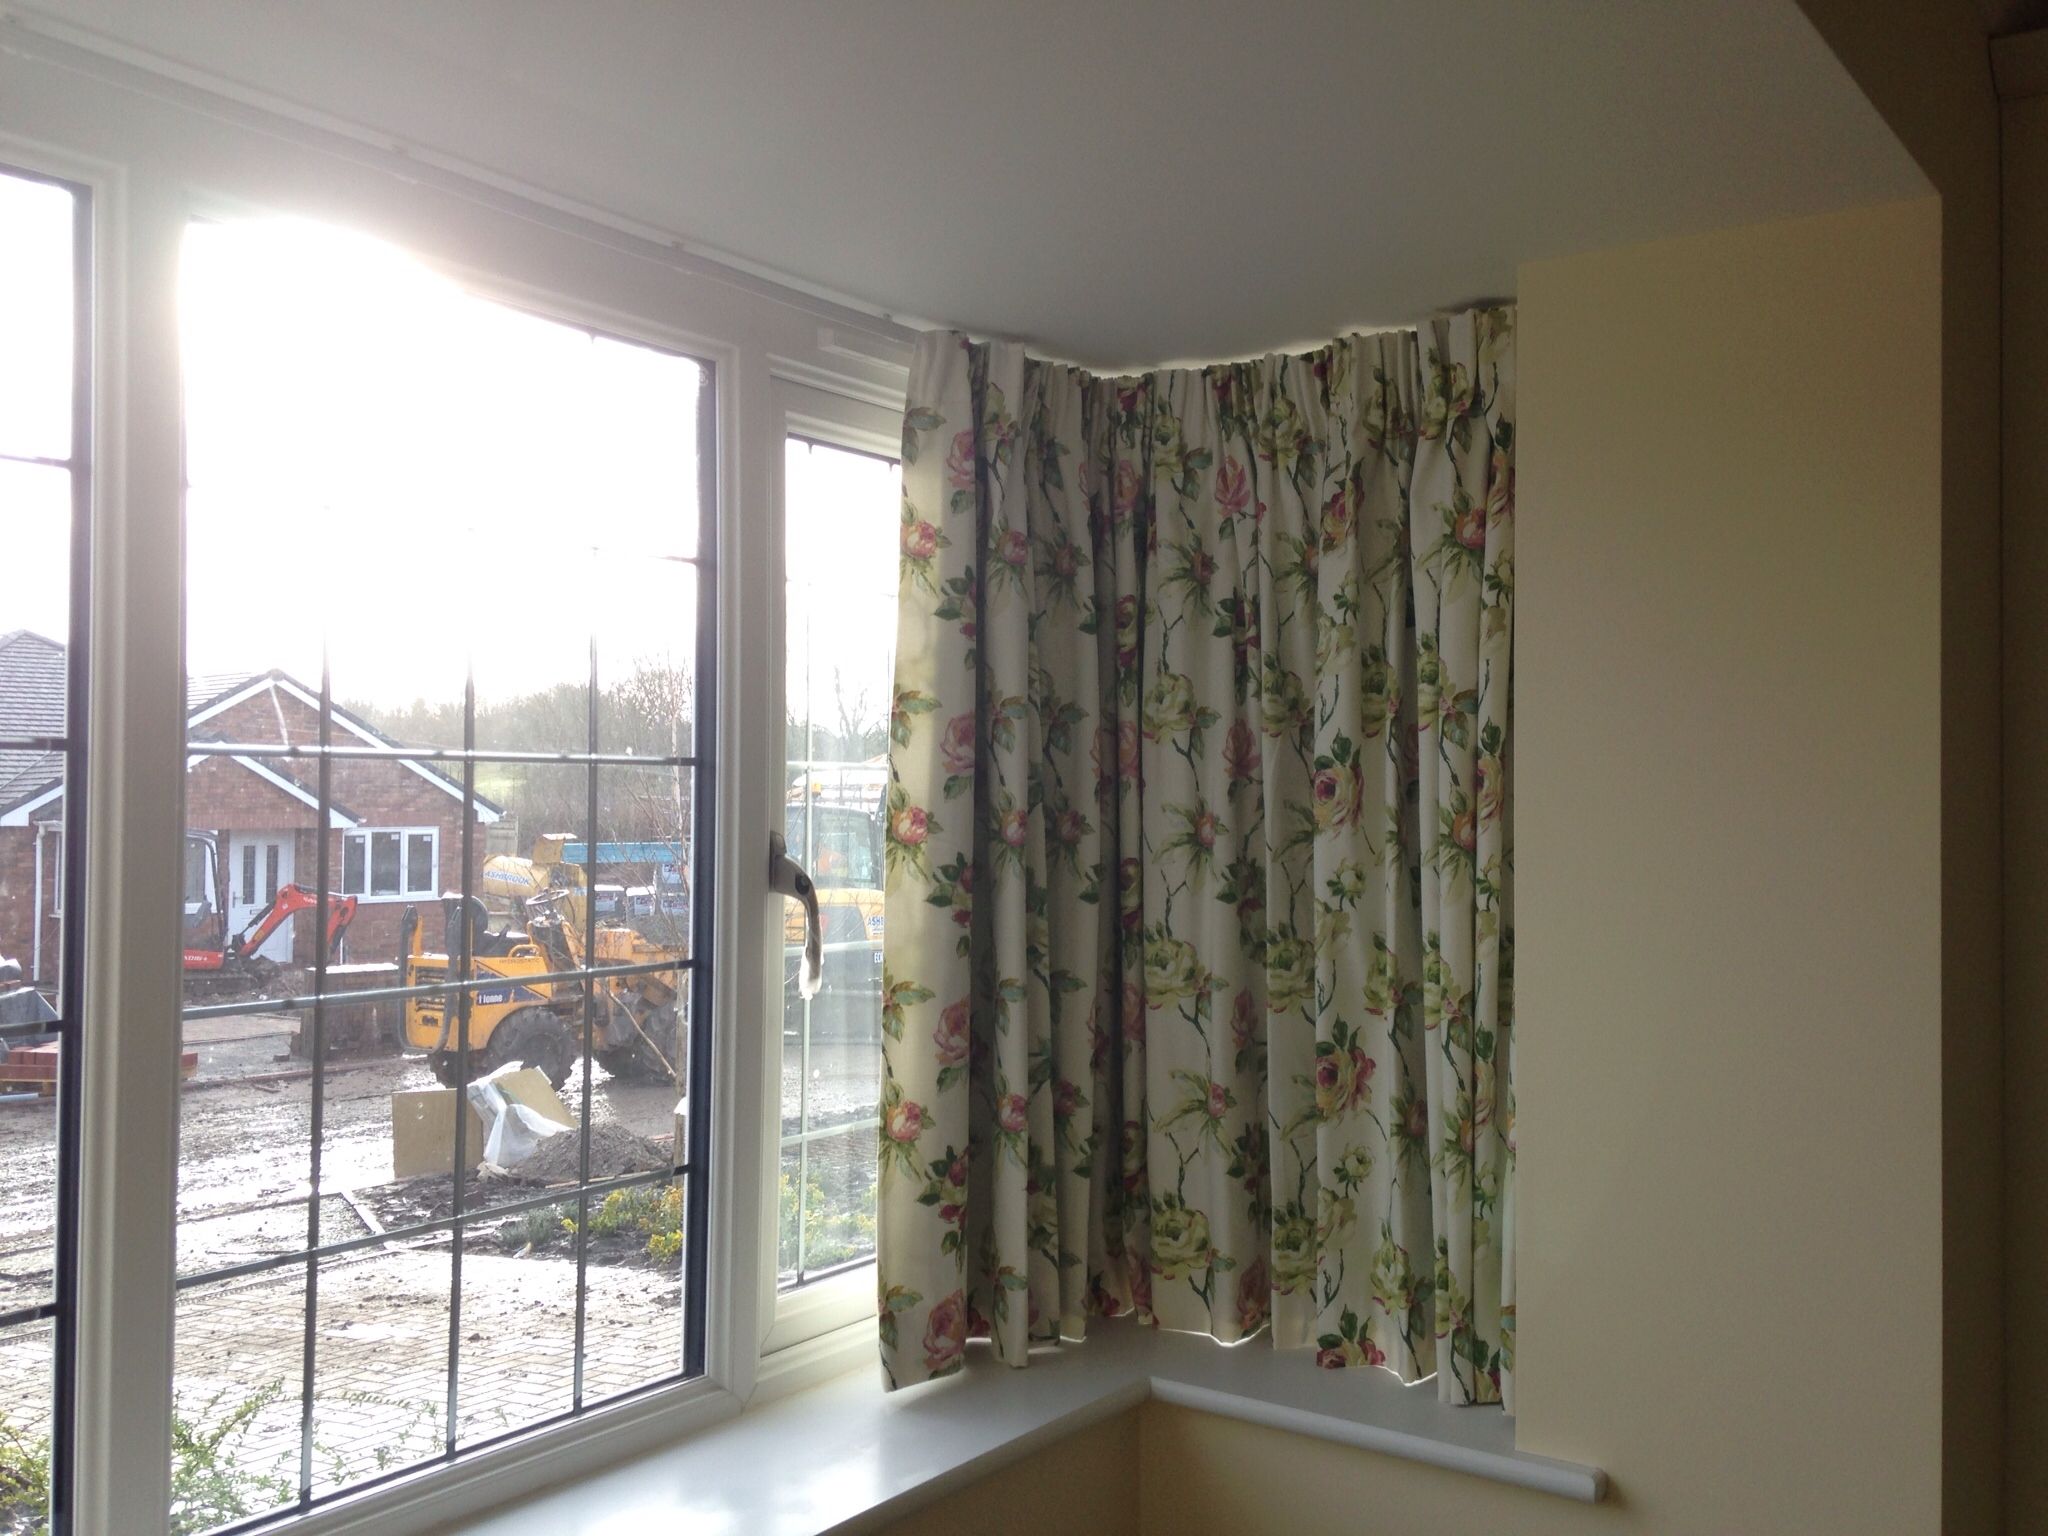 Bay Windows Design With Small Curtain Decor Stunning Curtains For Within Curtains For Small Bay Windows (View 4 of 15)